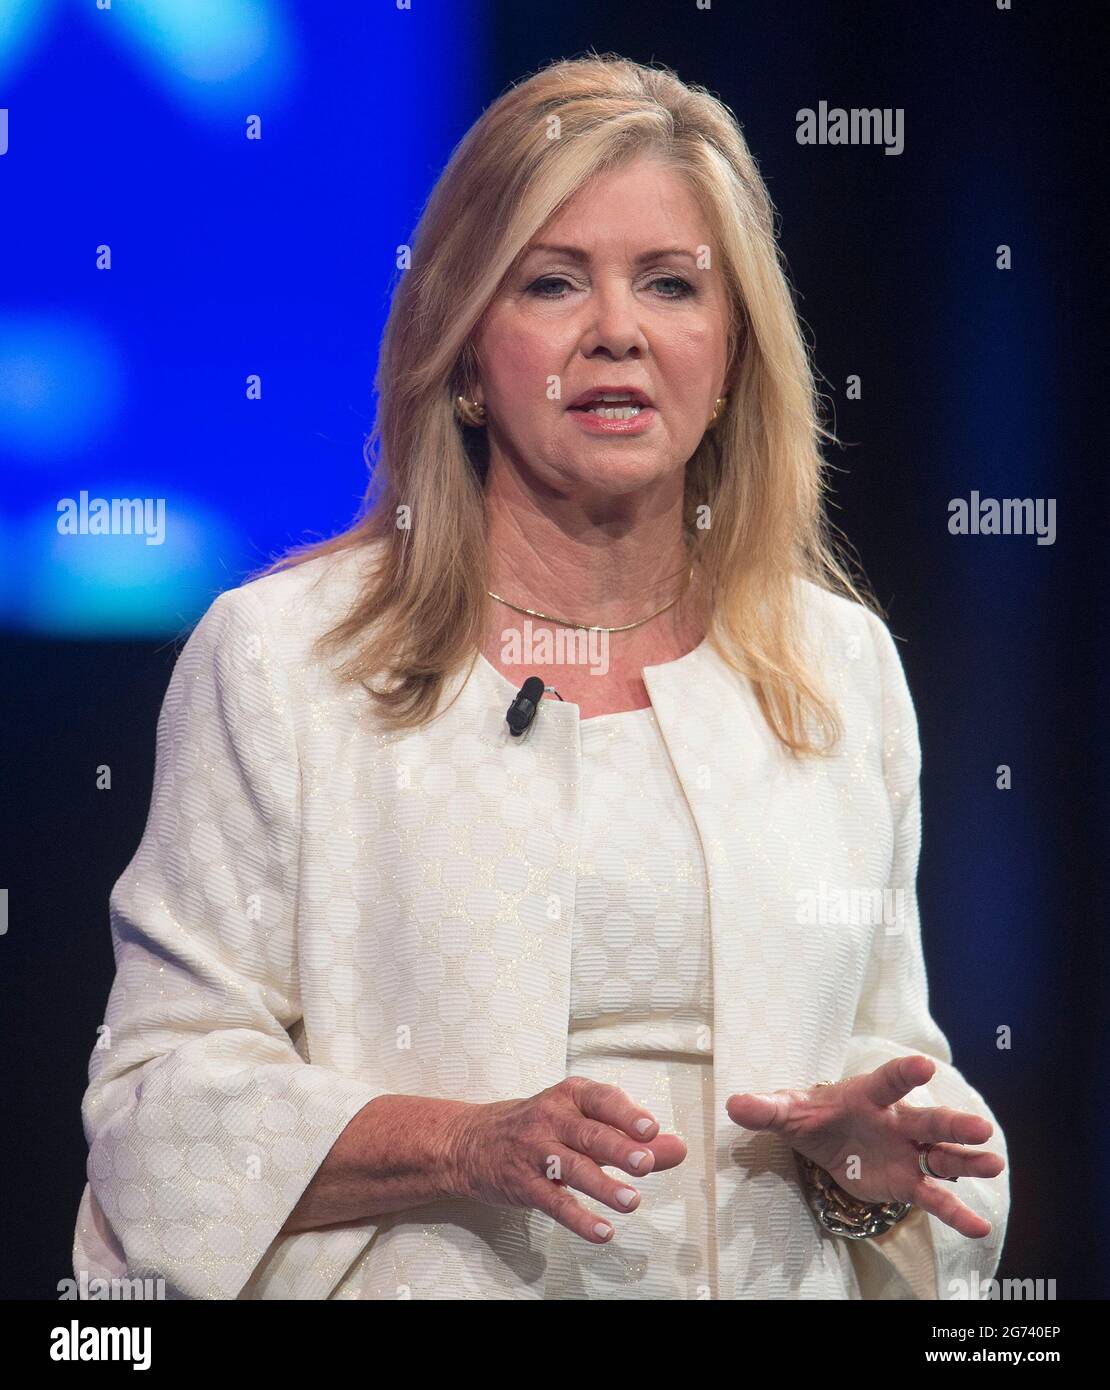 Dallas, Texas, USA. 10th July, 2021. Senator MARSHA BLACKBURN of Tennessee speaks at CPAC 2021: America UnCanceled. Organized by the American Conservative Union, the three-day conference features speakers from the right side of America's political spectrum. Credit: Brian Cahn/ZUMA Wire/Alamy Live News Stock Photo